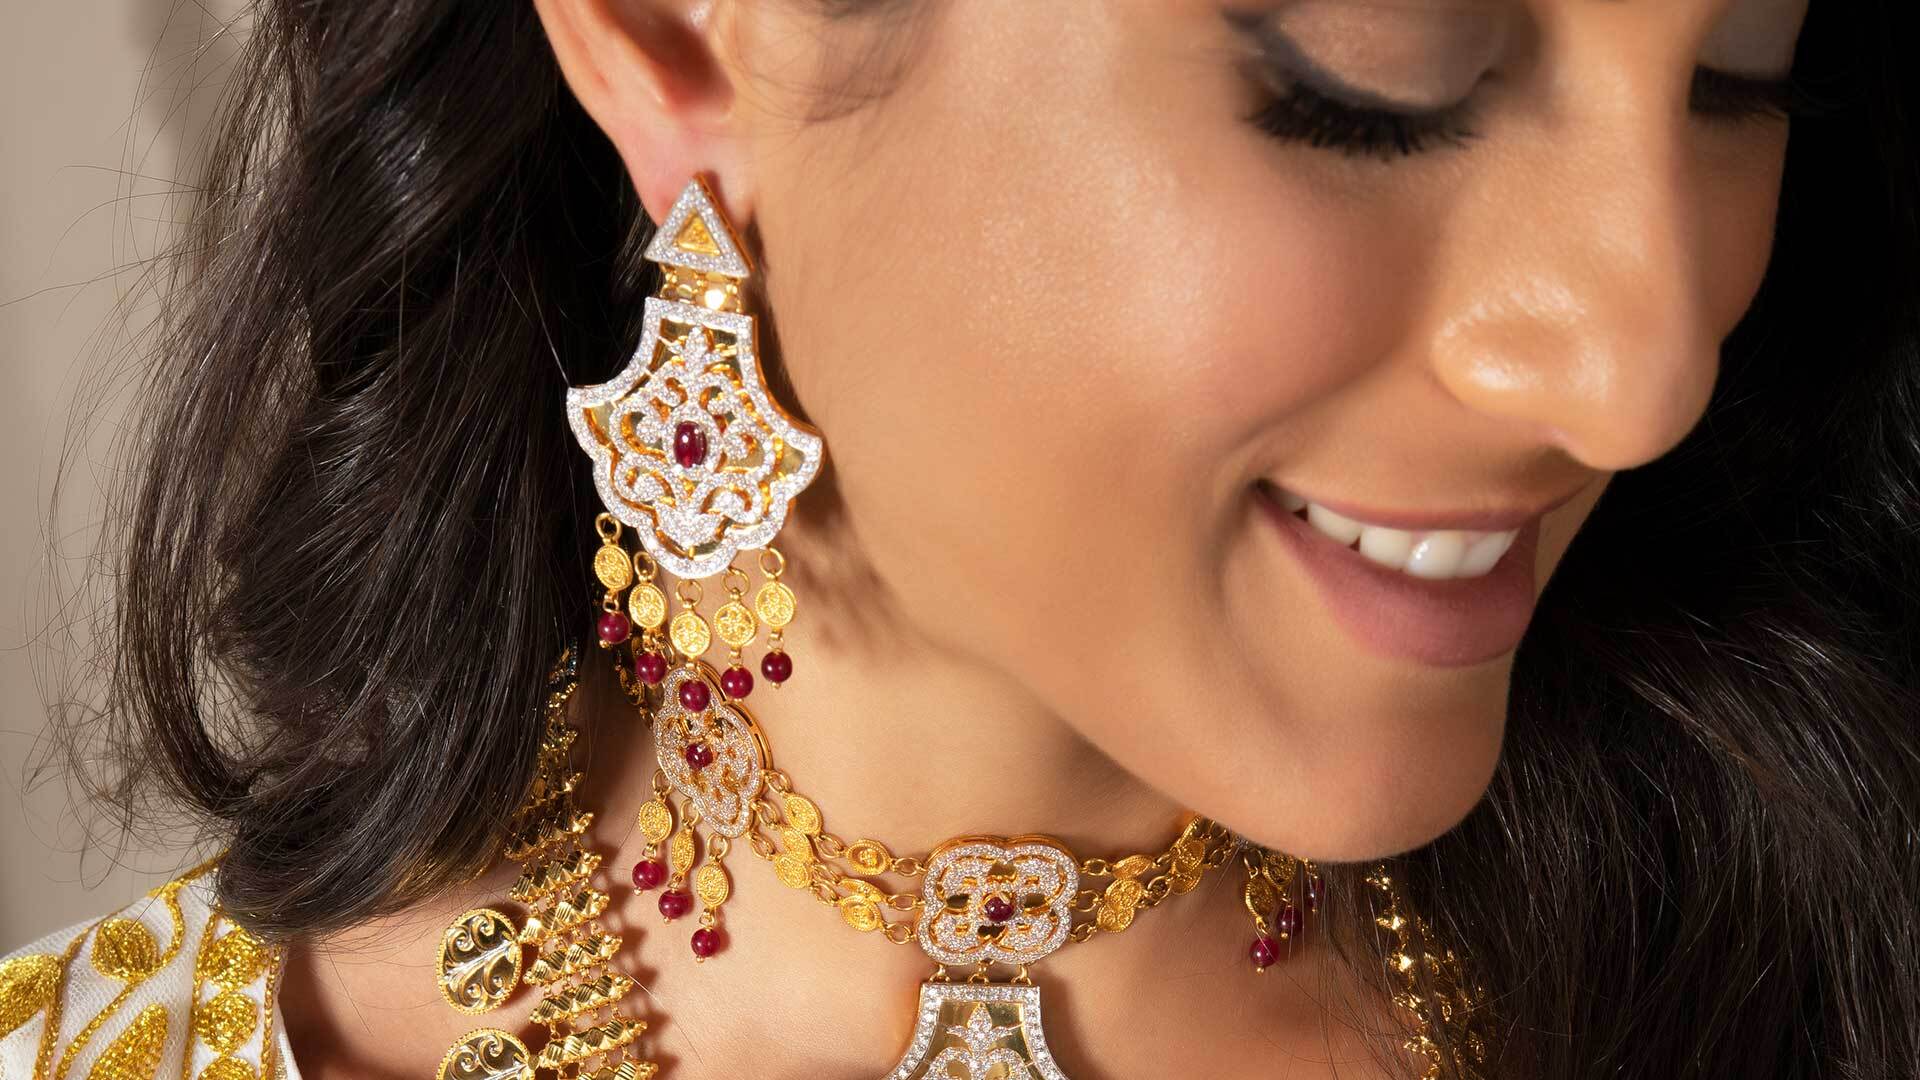 Types of earrings and how to differentiate them | DIVAIN – DIVAIN® EU